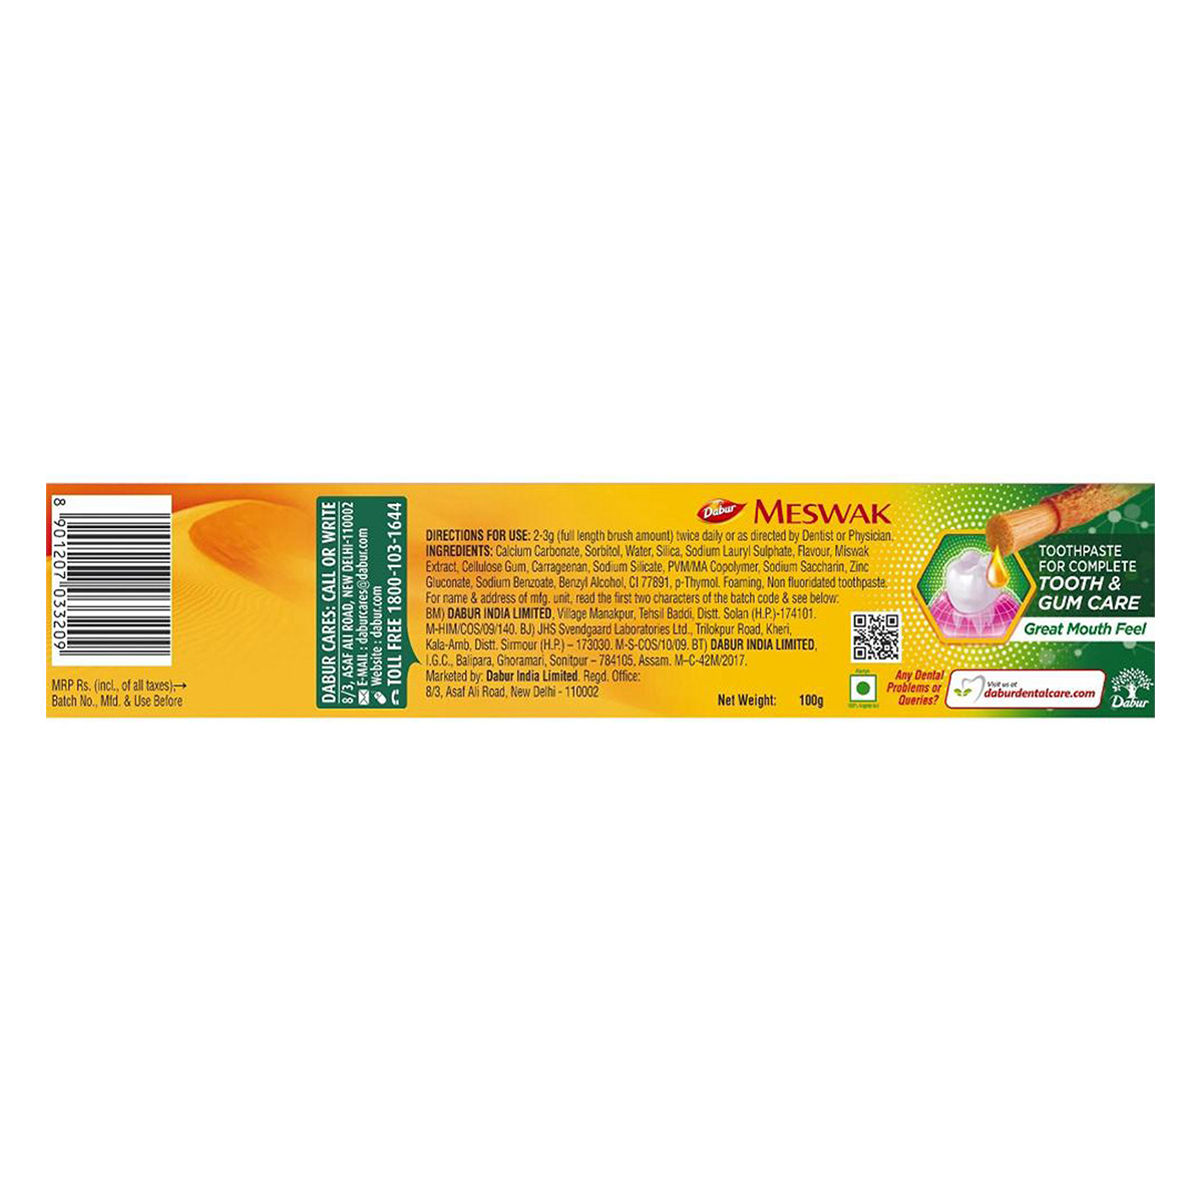 Dabur Meswak Complete Tooth & Gum Care Toothpaste, 100 gm, Pack of 1 